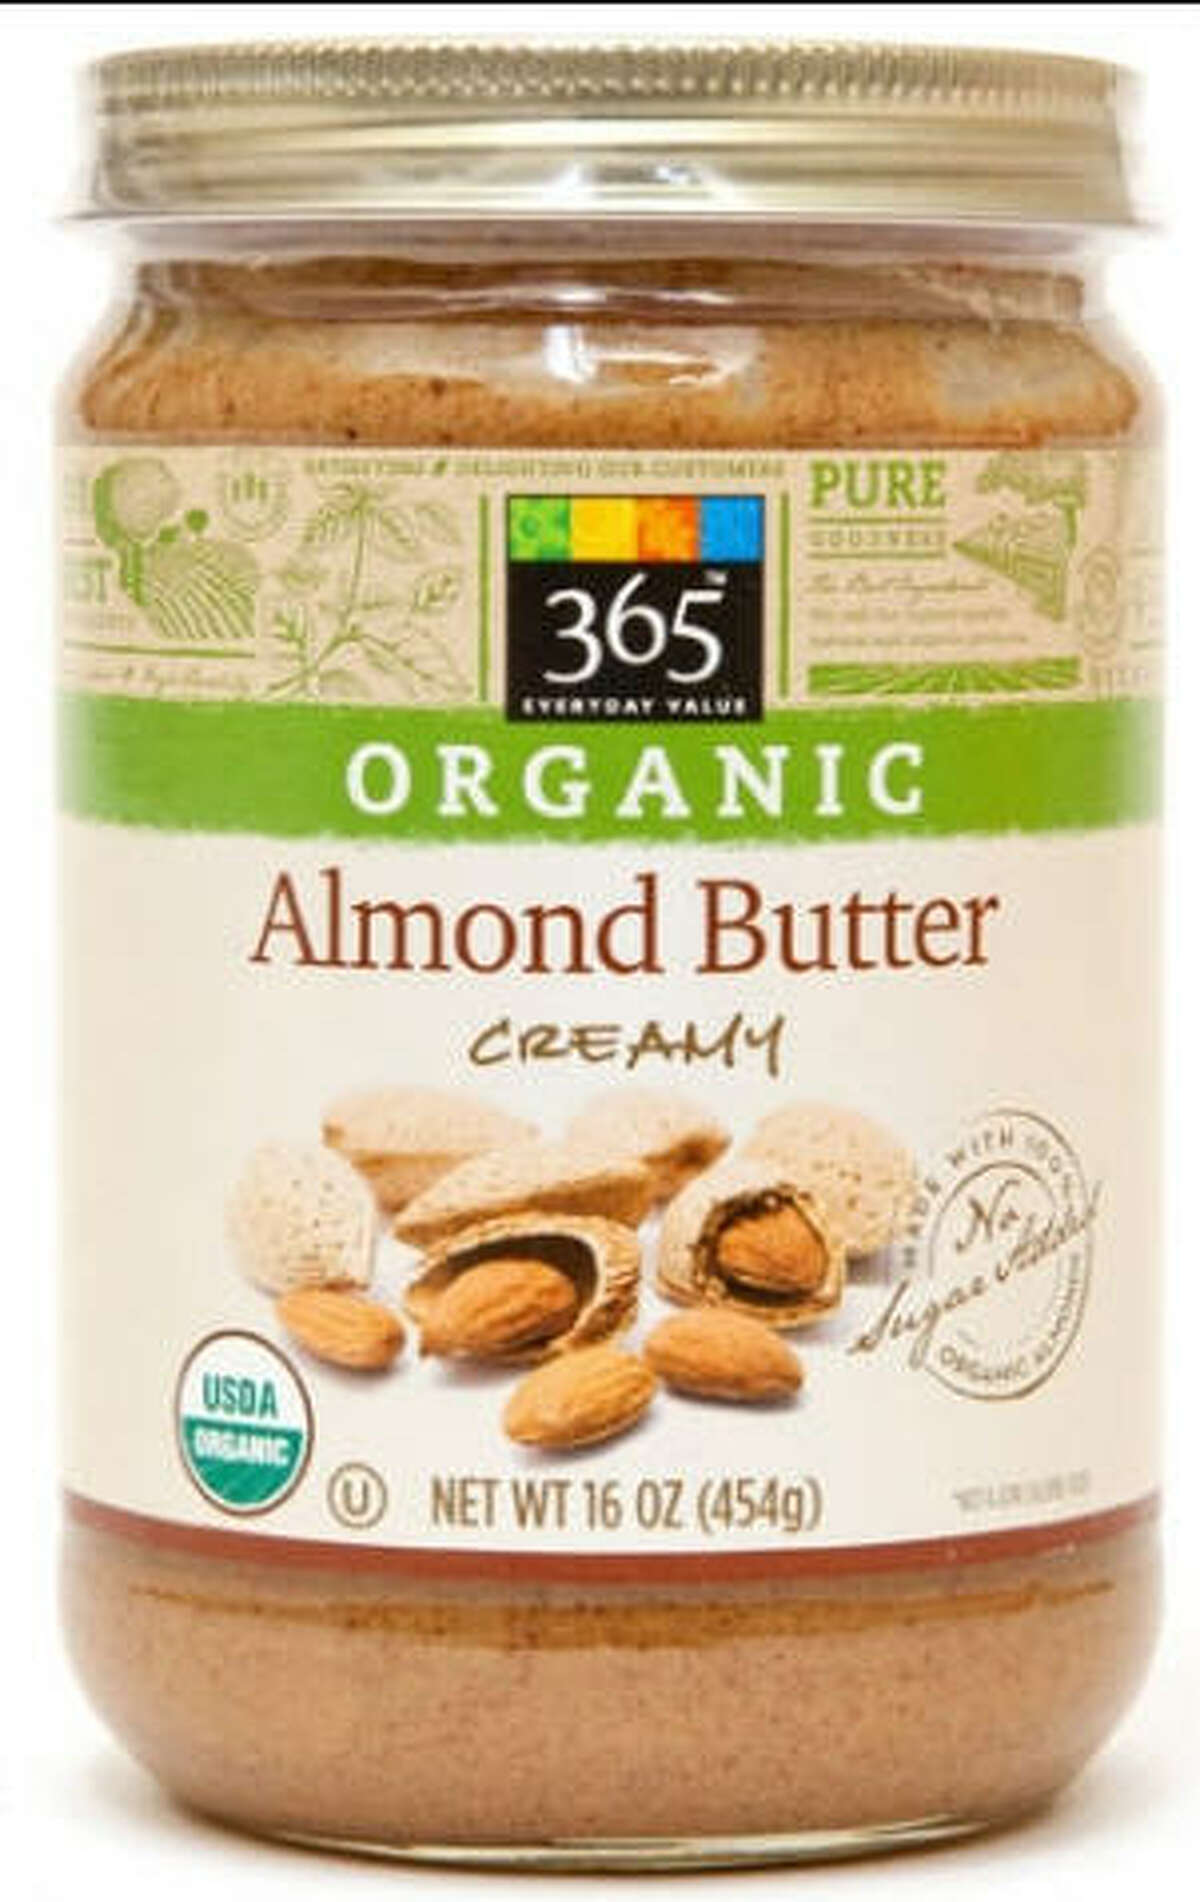 Two types of Whole Food 365 Almond butter have been recalled along with jars from Trader Joe's, Kroger, Safeway, Arrowhead and Marahatha.